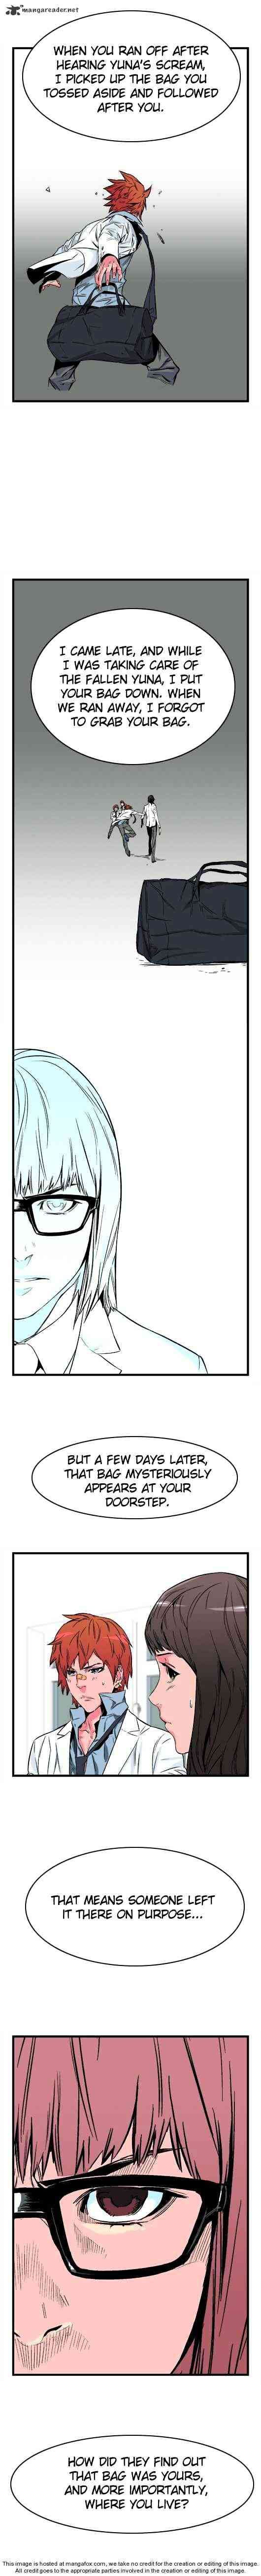 Noblesse Chapter 22 _ Chapters 22-30 page 22